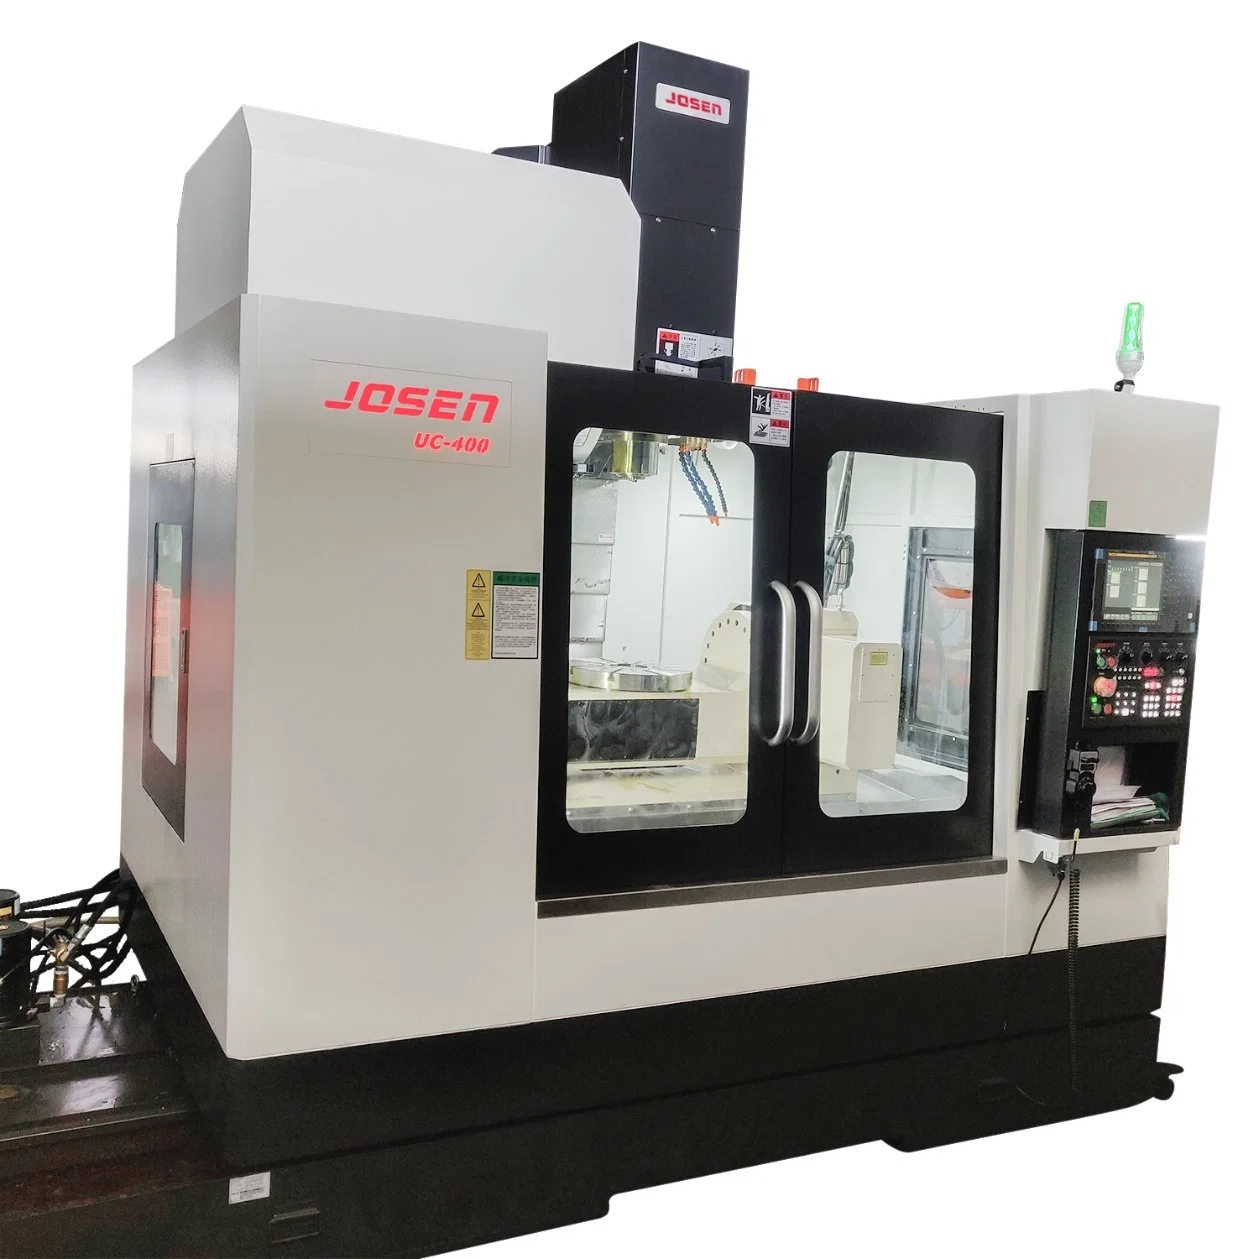 UC-400 High Rigid High Precision Monthly Deals 5 Axis CNC Milling Machine Vertical Machining Center Pure 5 Axis